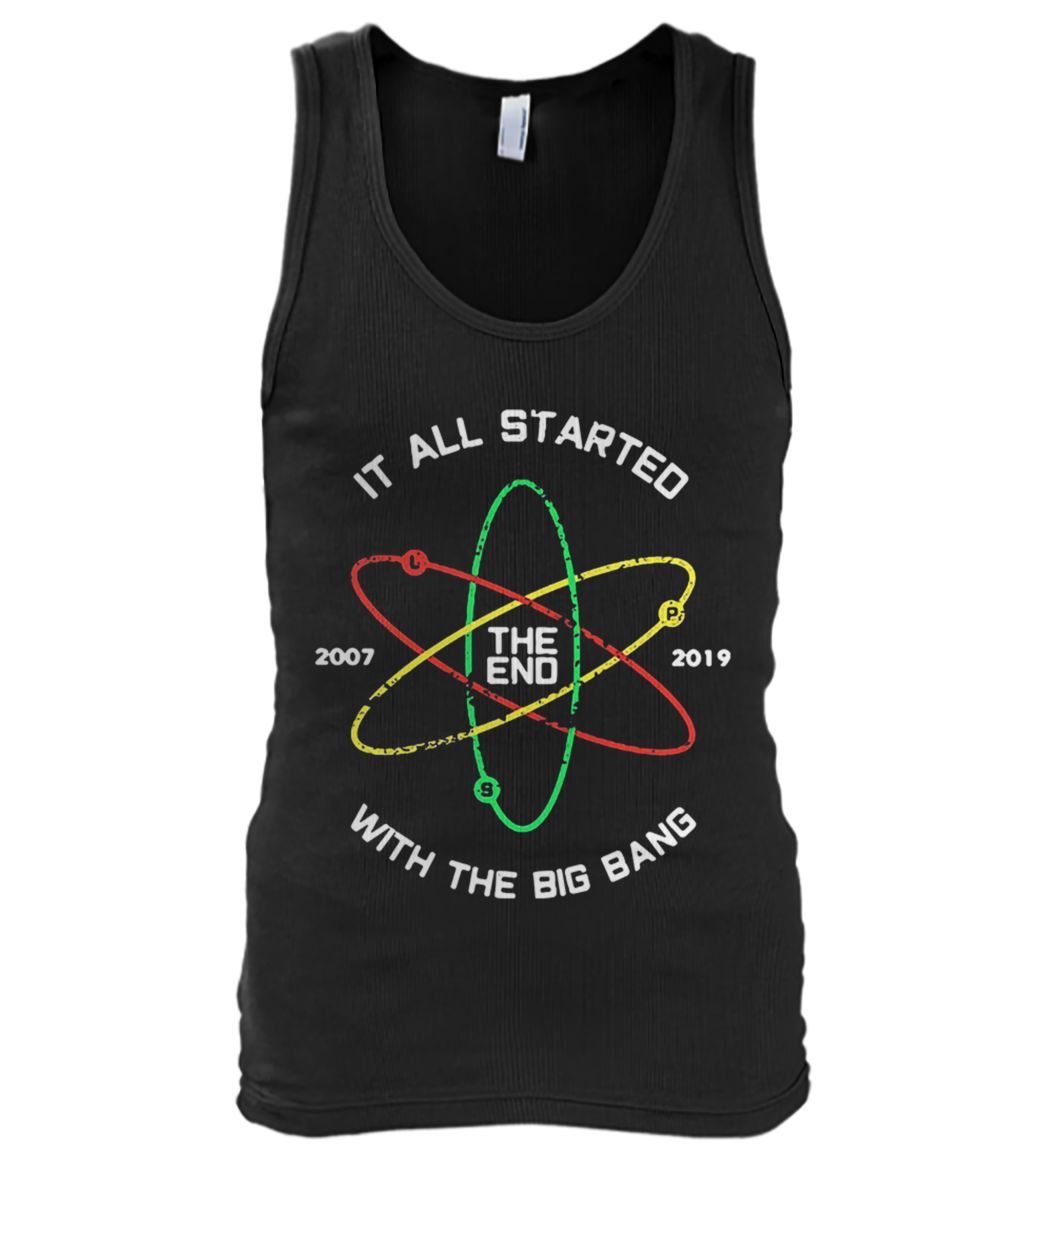 The end 2007 2019 it all started with the big bang men's tank top